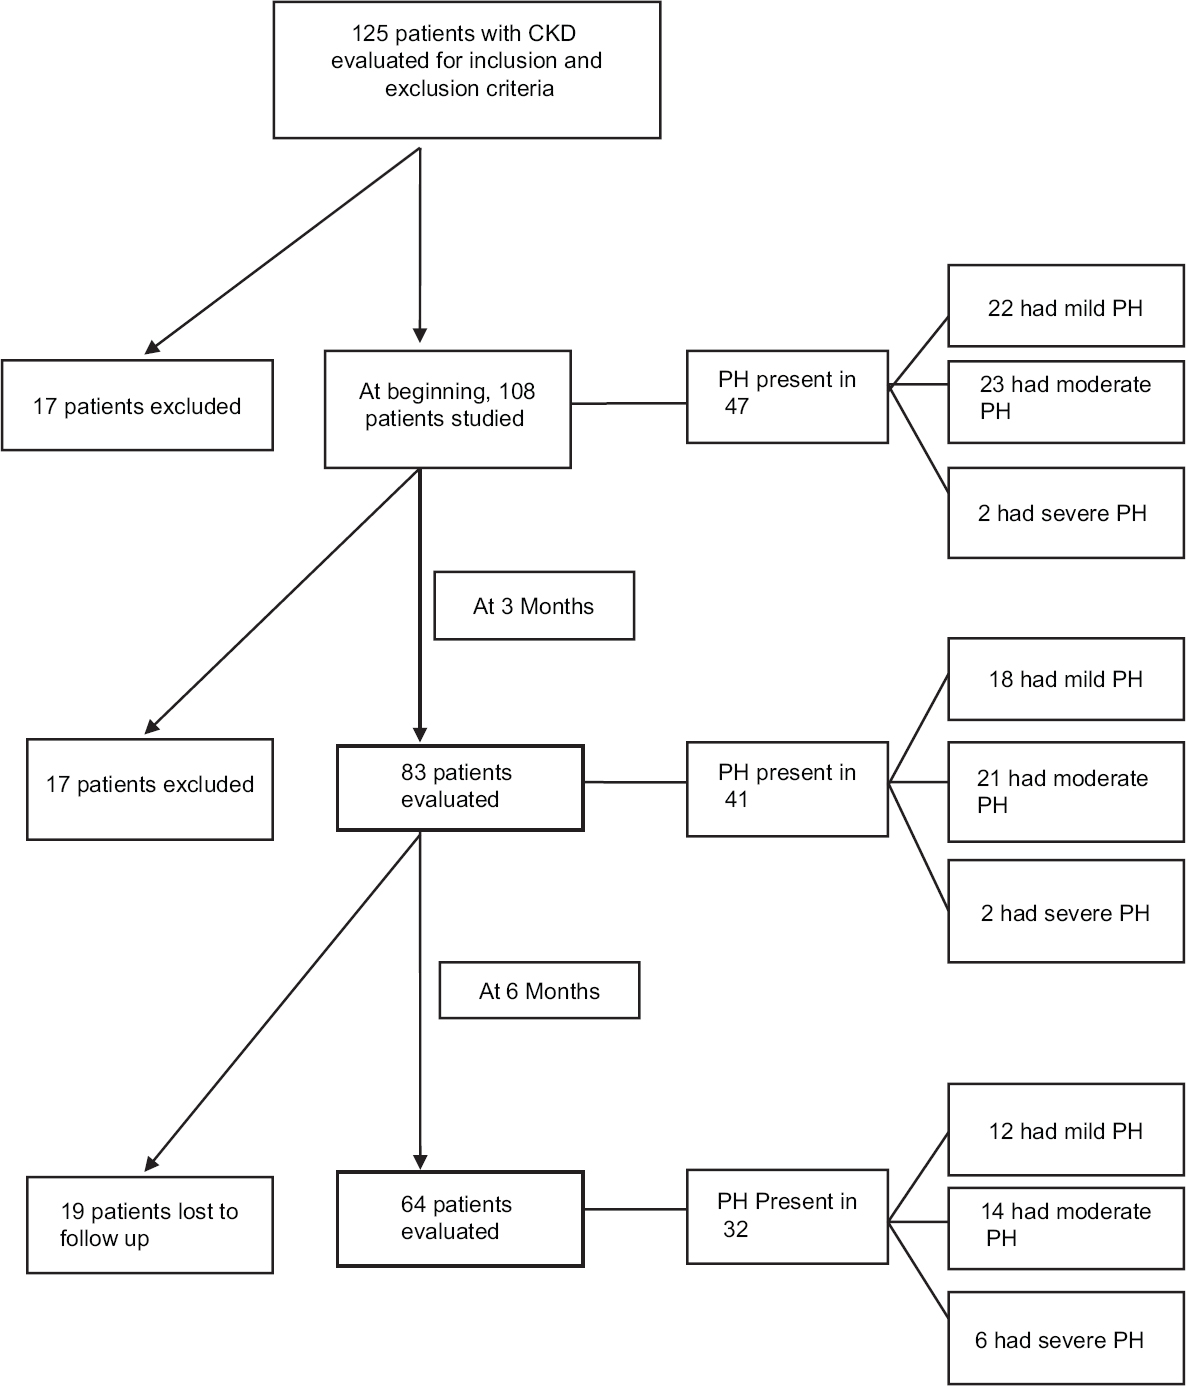 Flowchart showing key results of the study